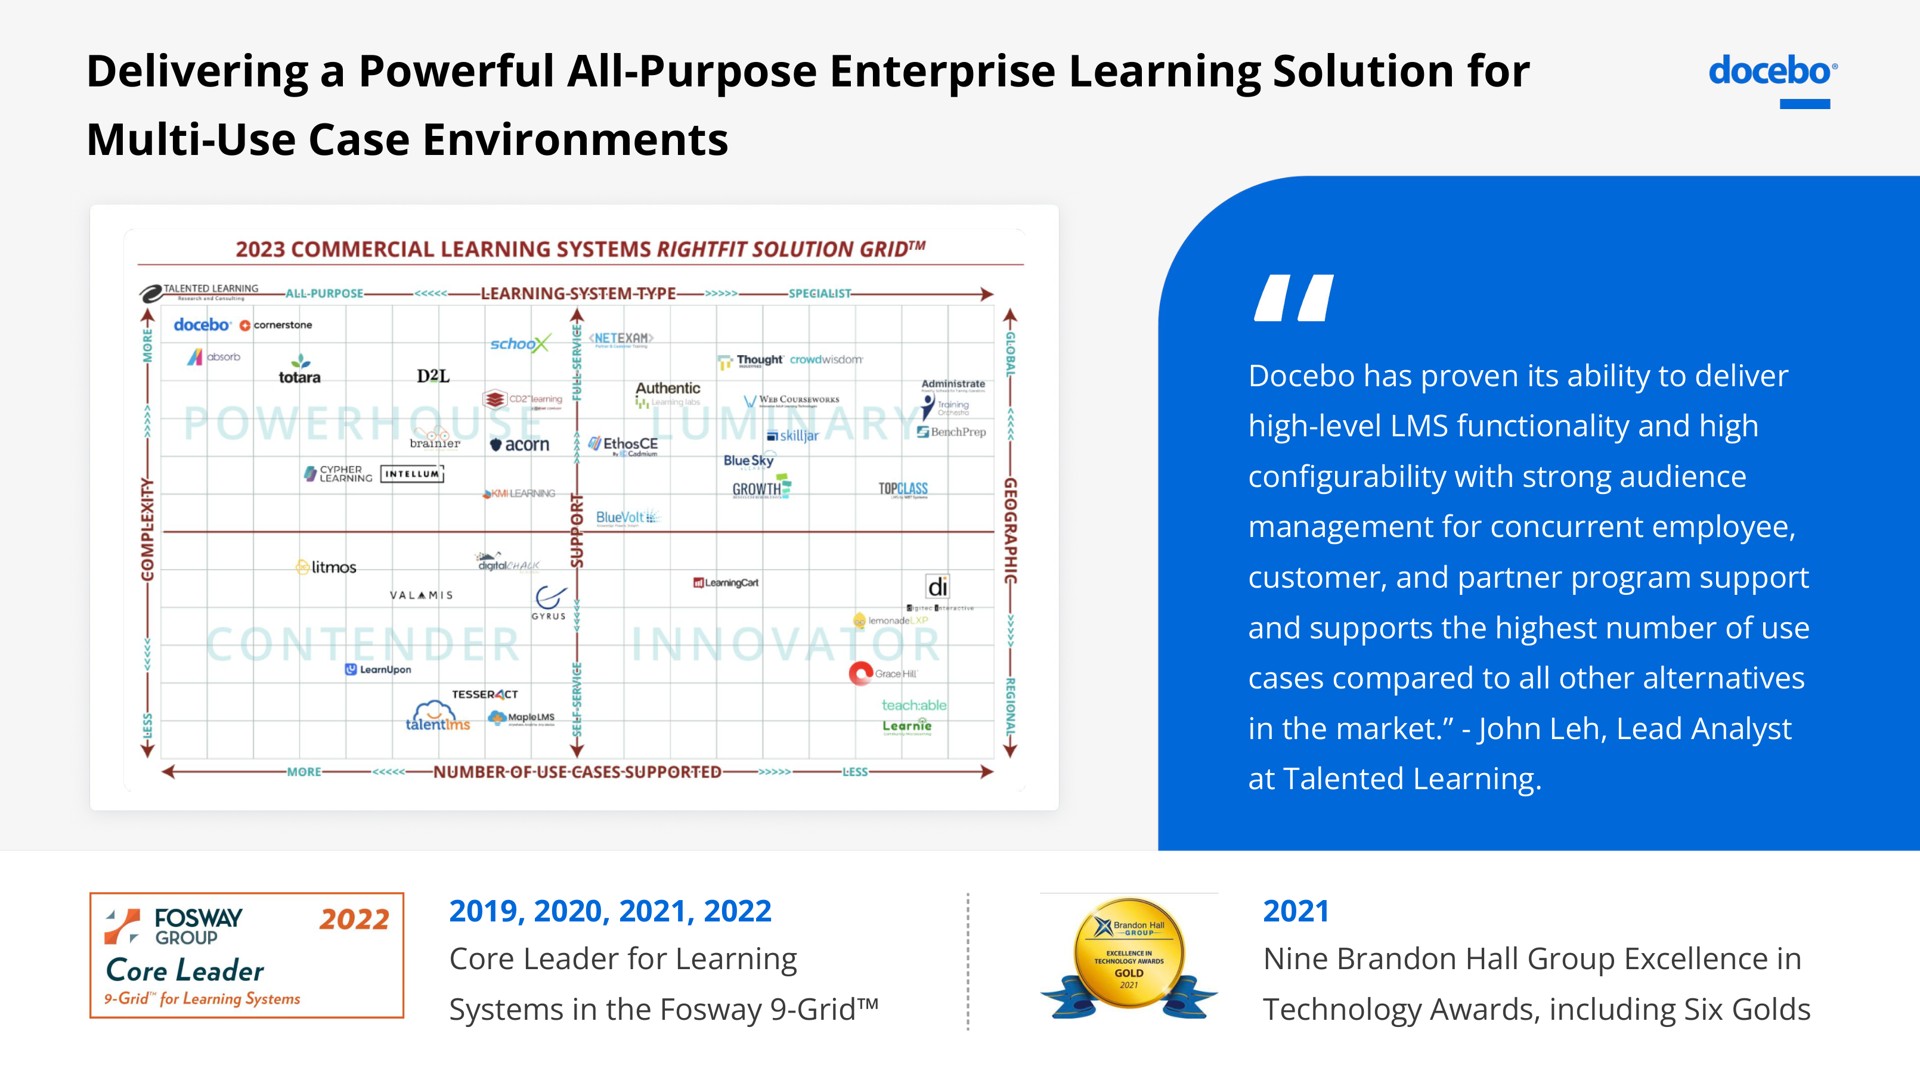 delivering a powerful all purpose enterprise learning solution for use case environments | Docebo